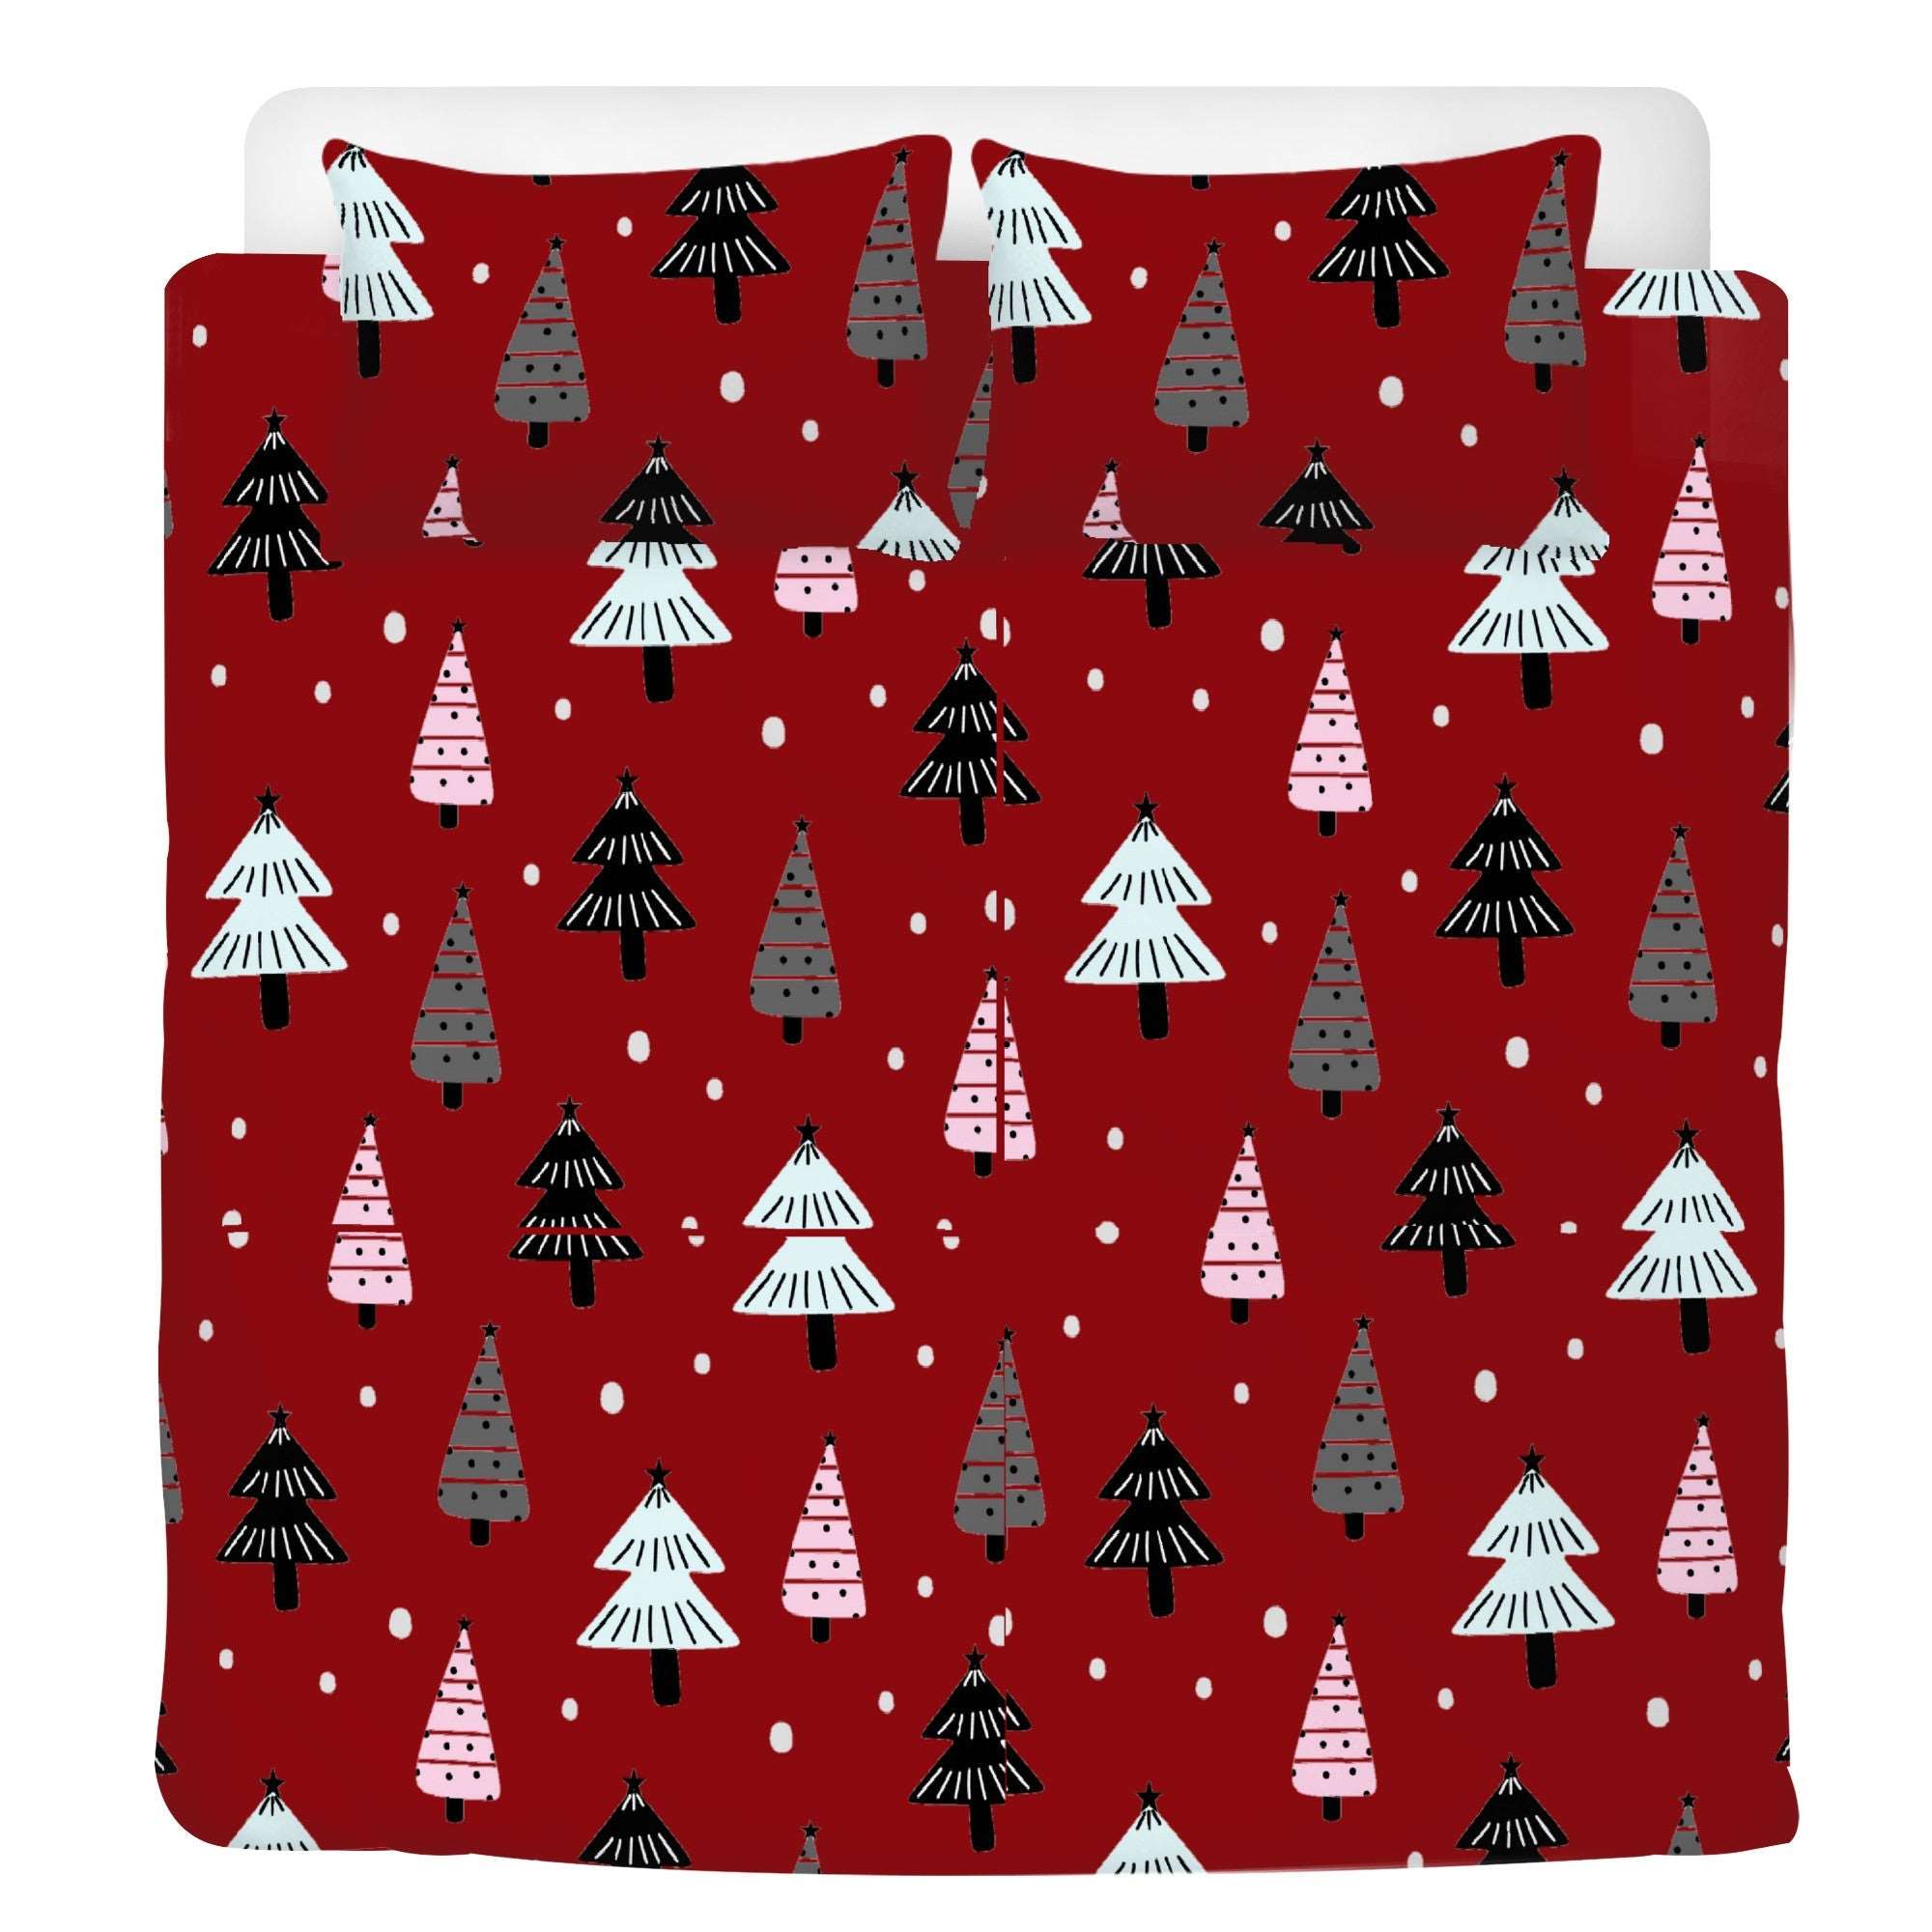 Bedding Red with Christmas trees Home-clothes-jewelry